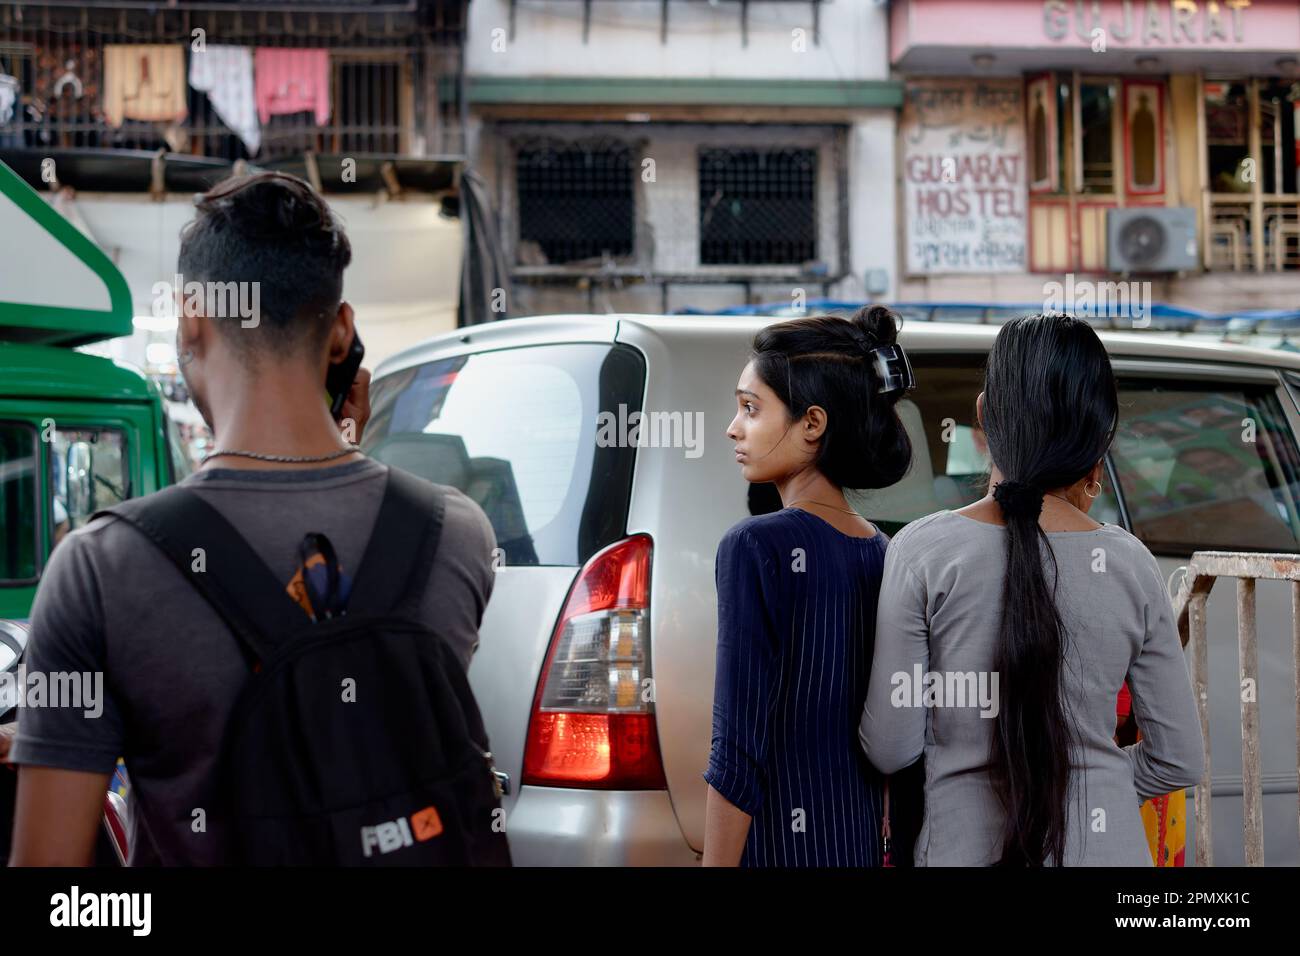 Two young Indian women and a random male passer-by in a street in Pydhonie area, Mumbai, India Stock Photo